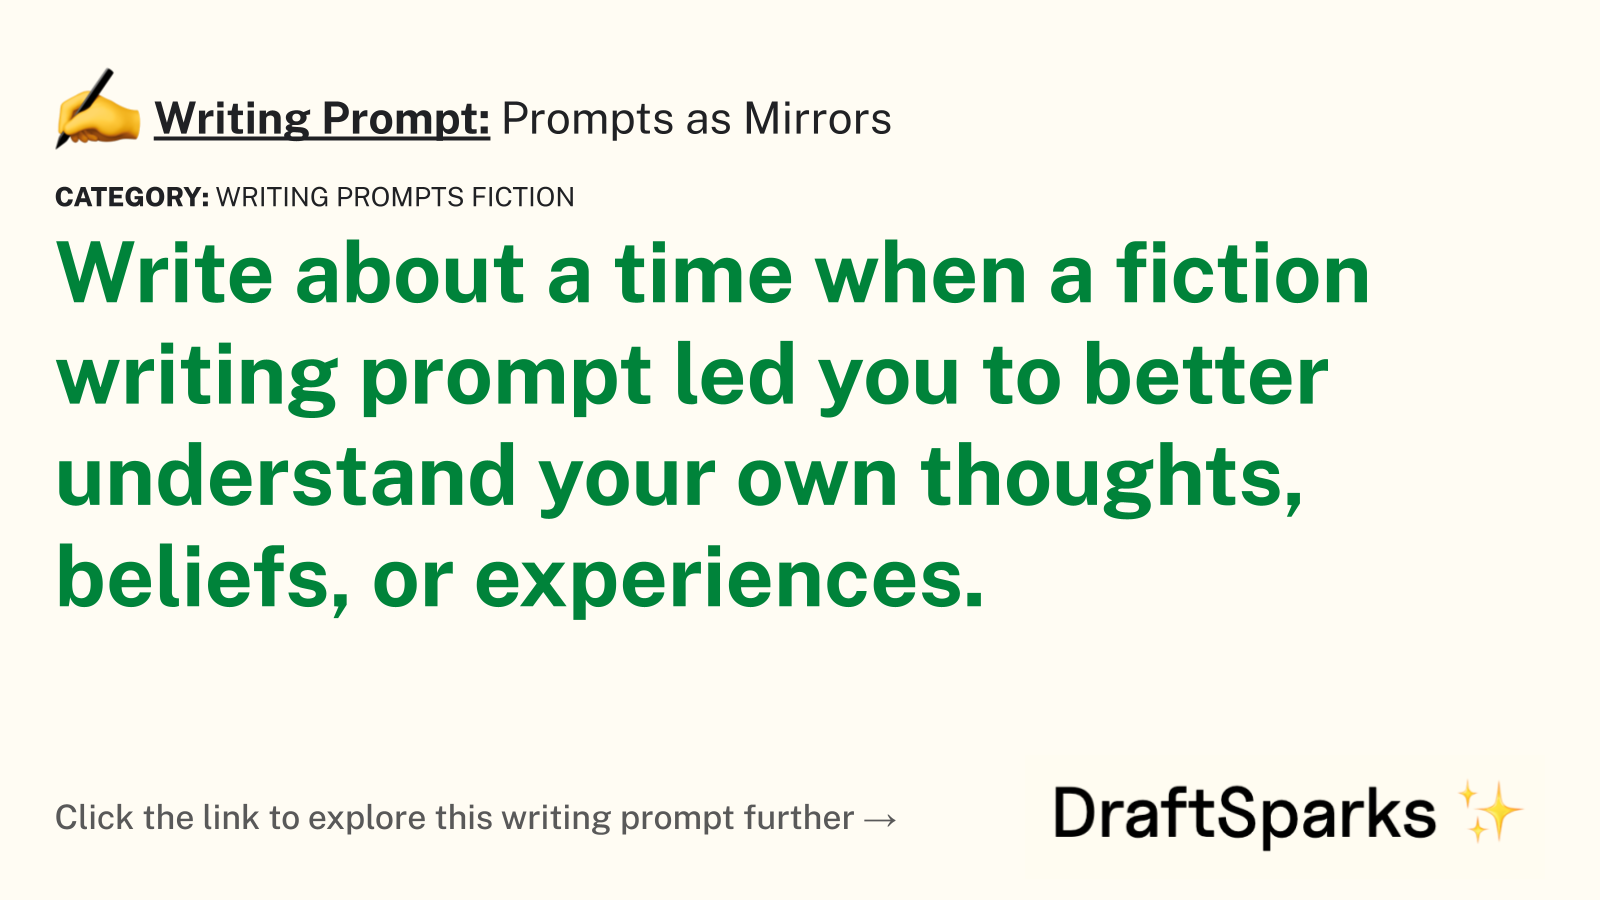 Prompts as Mirrors